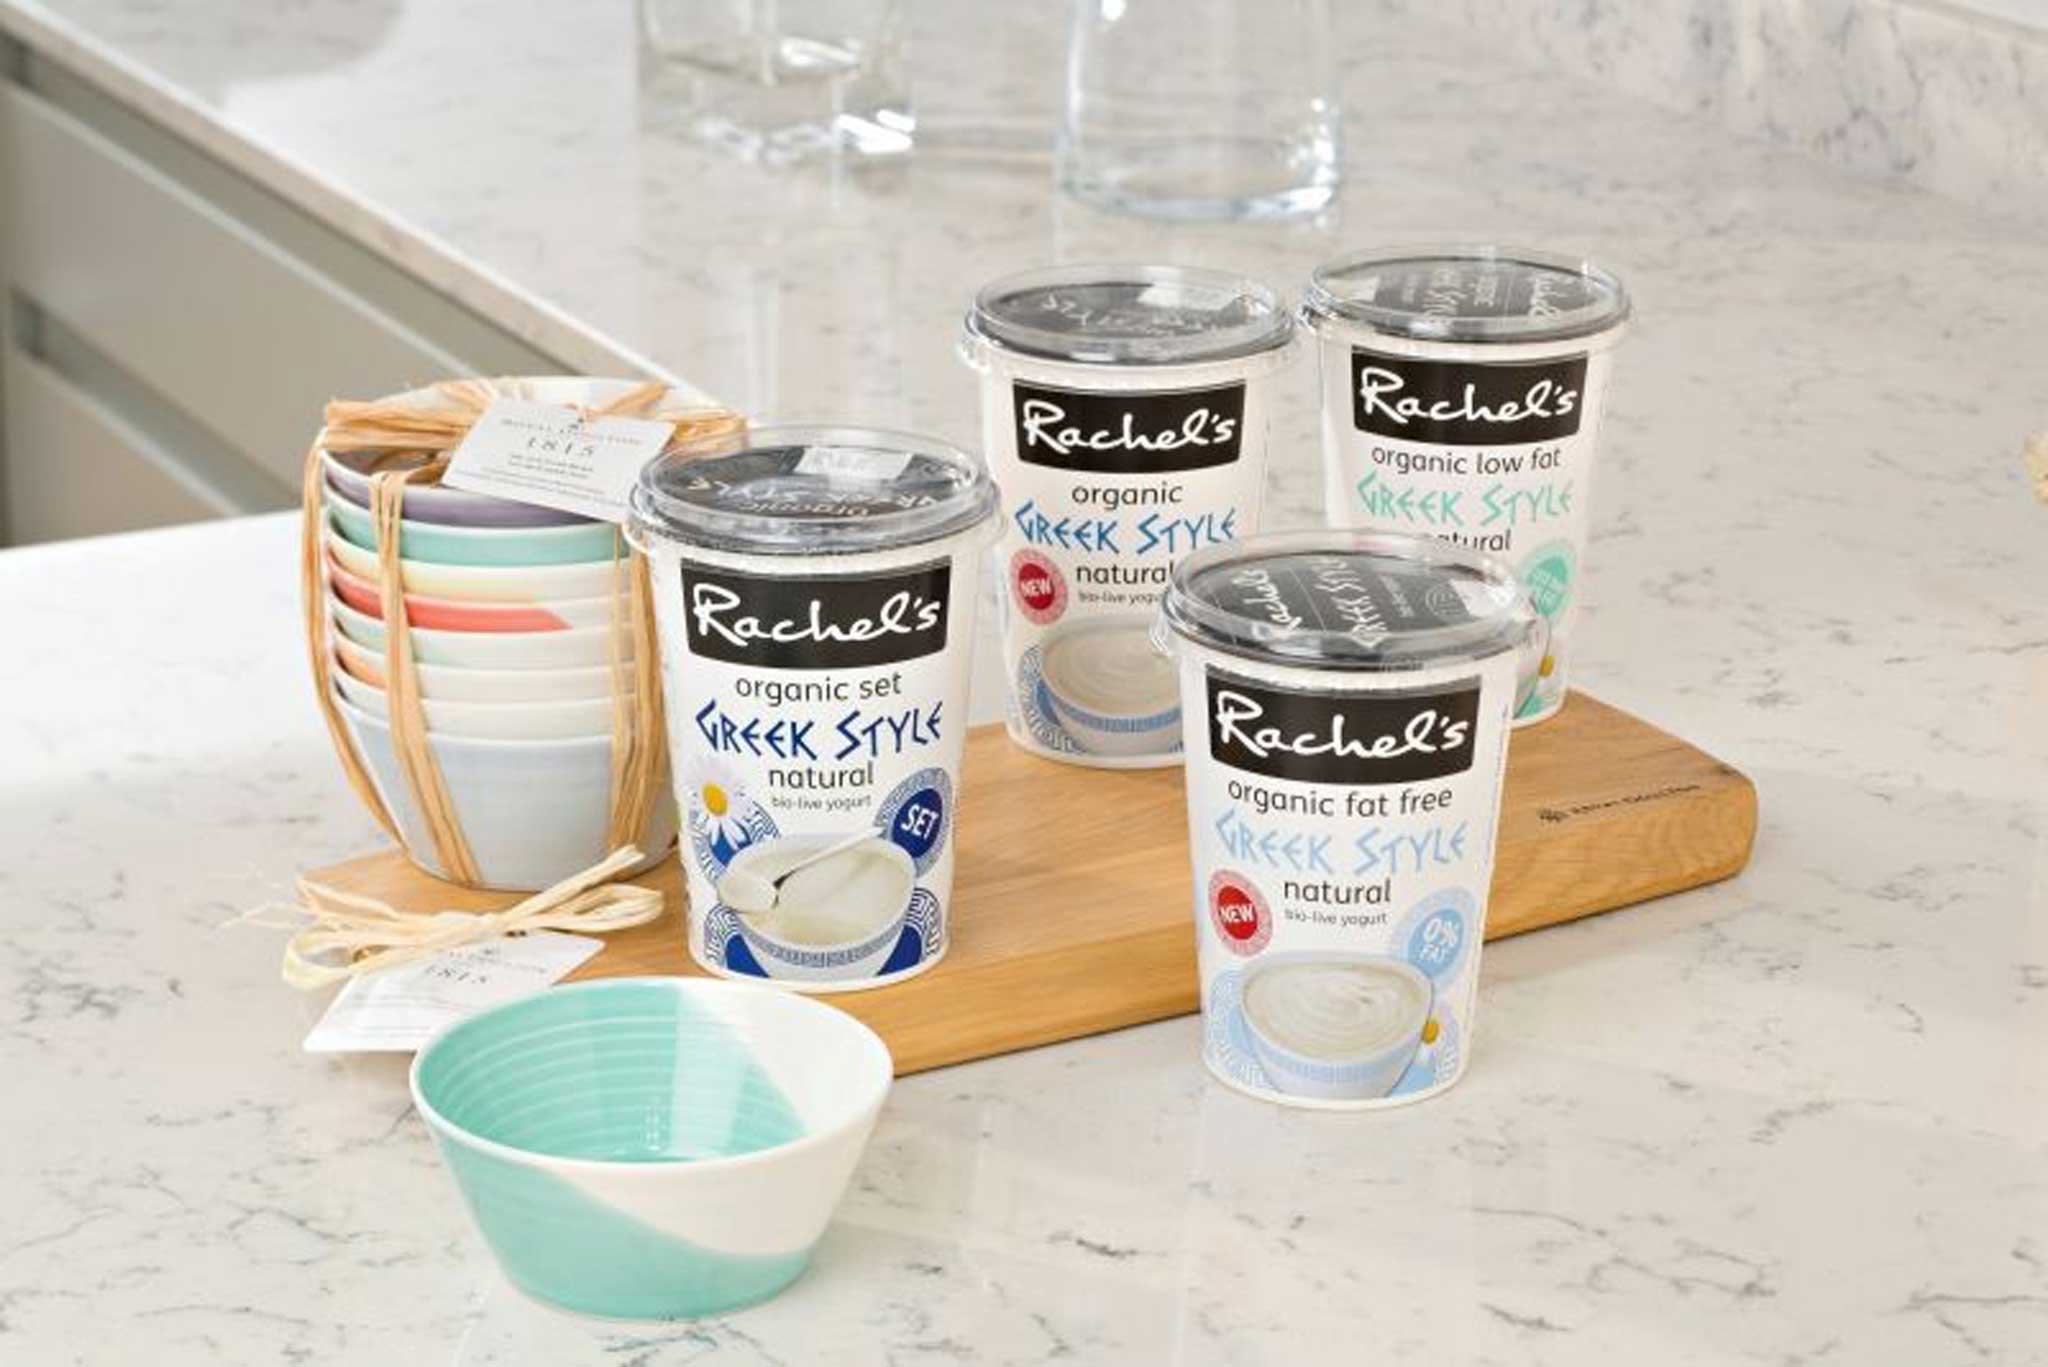 Promotional packs of Rachel's yoghurt carry a code – check it on the website to see if you've won a set of Royal Doulton bowls